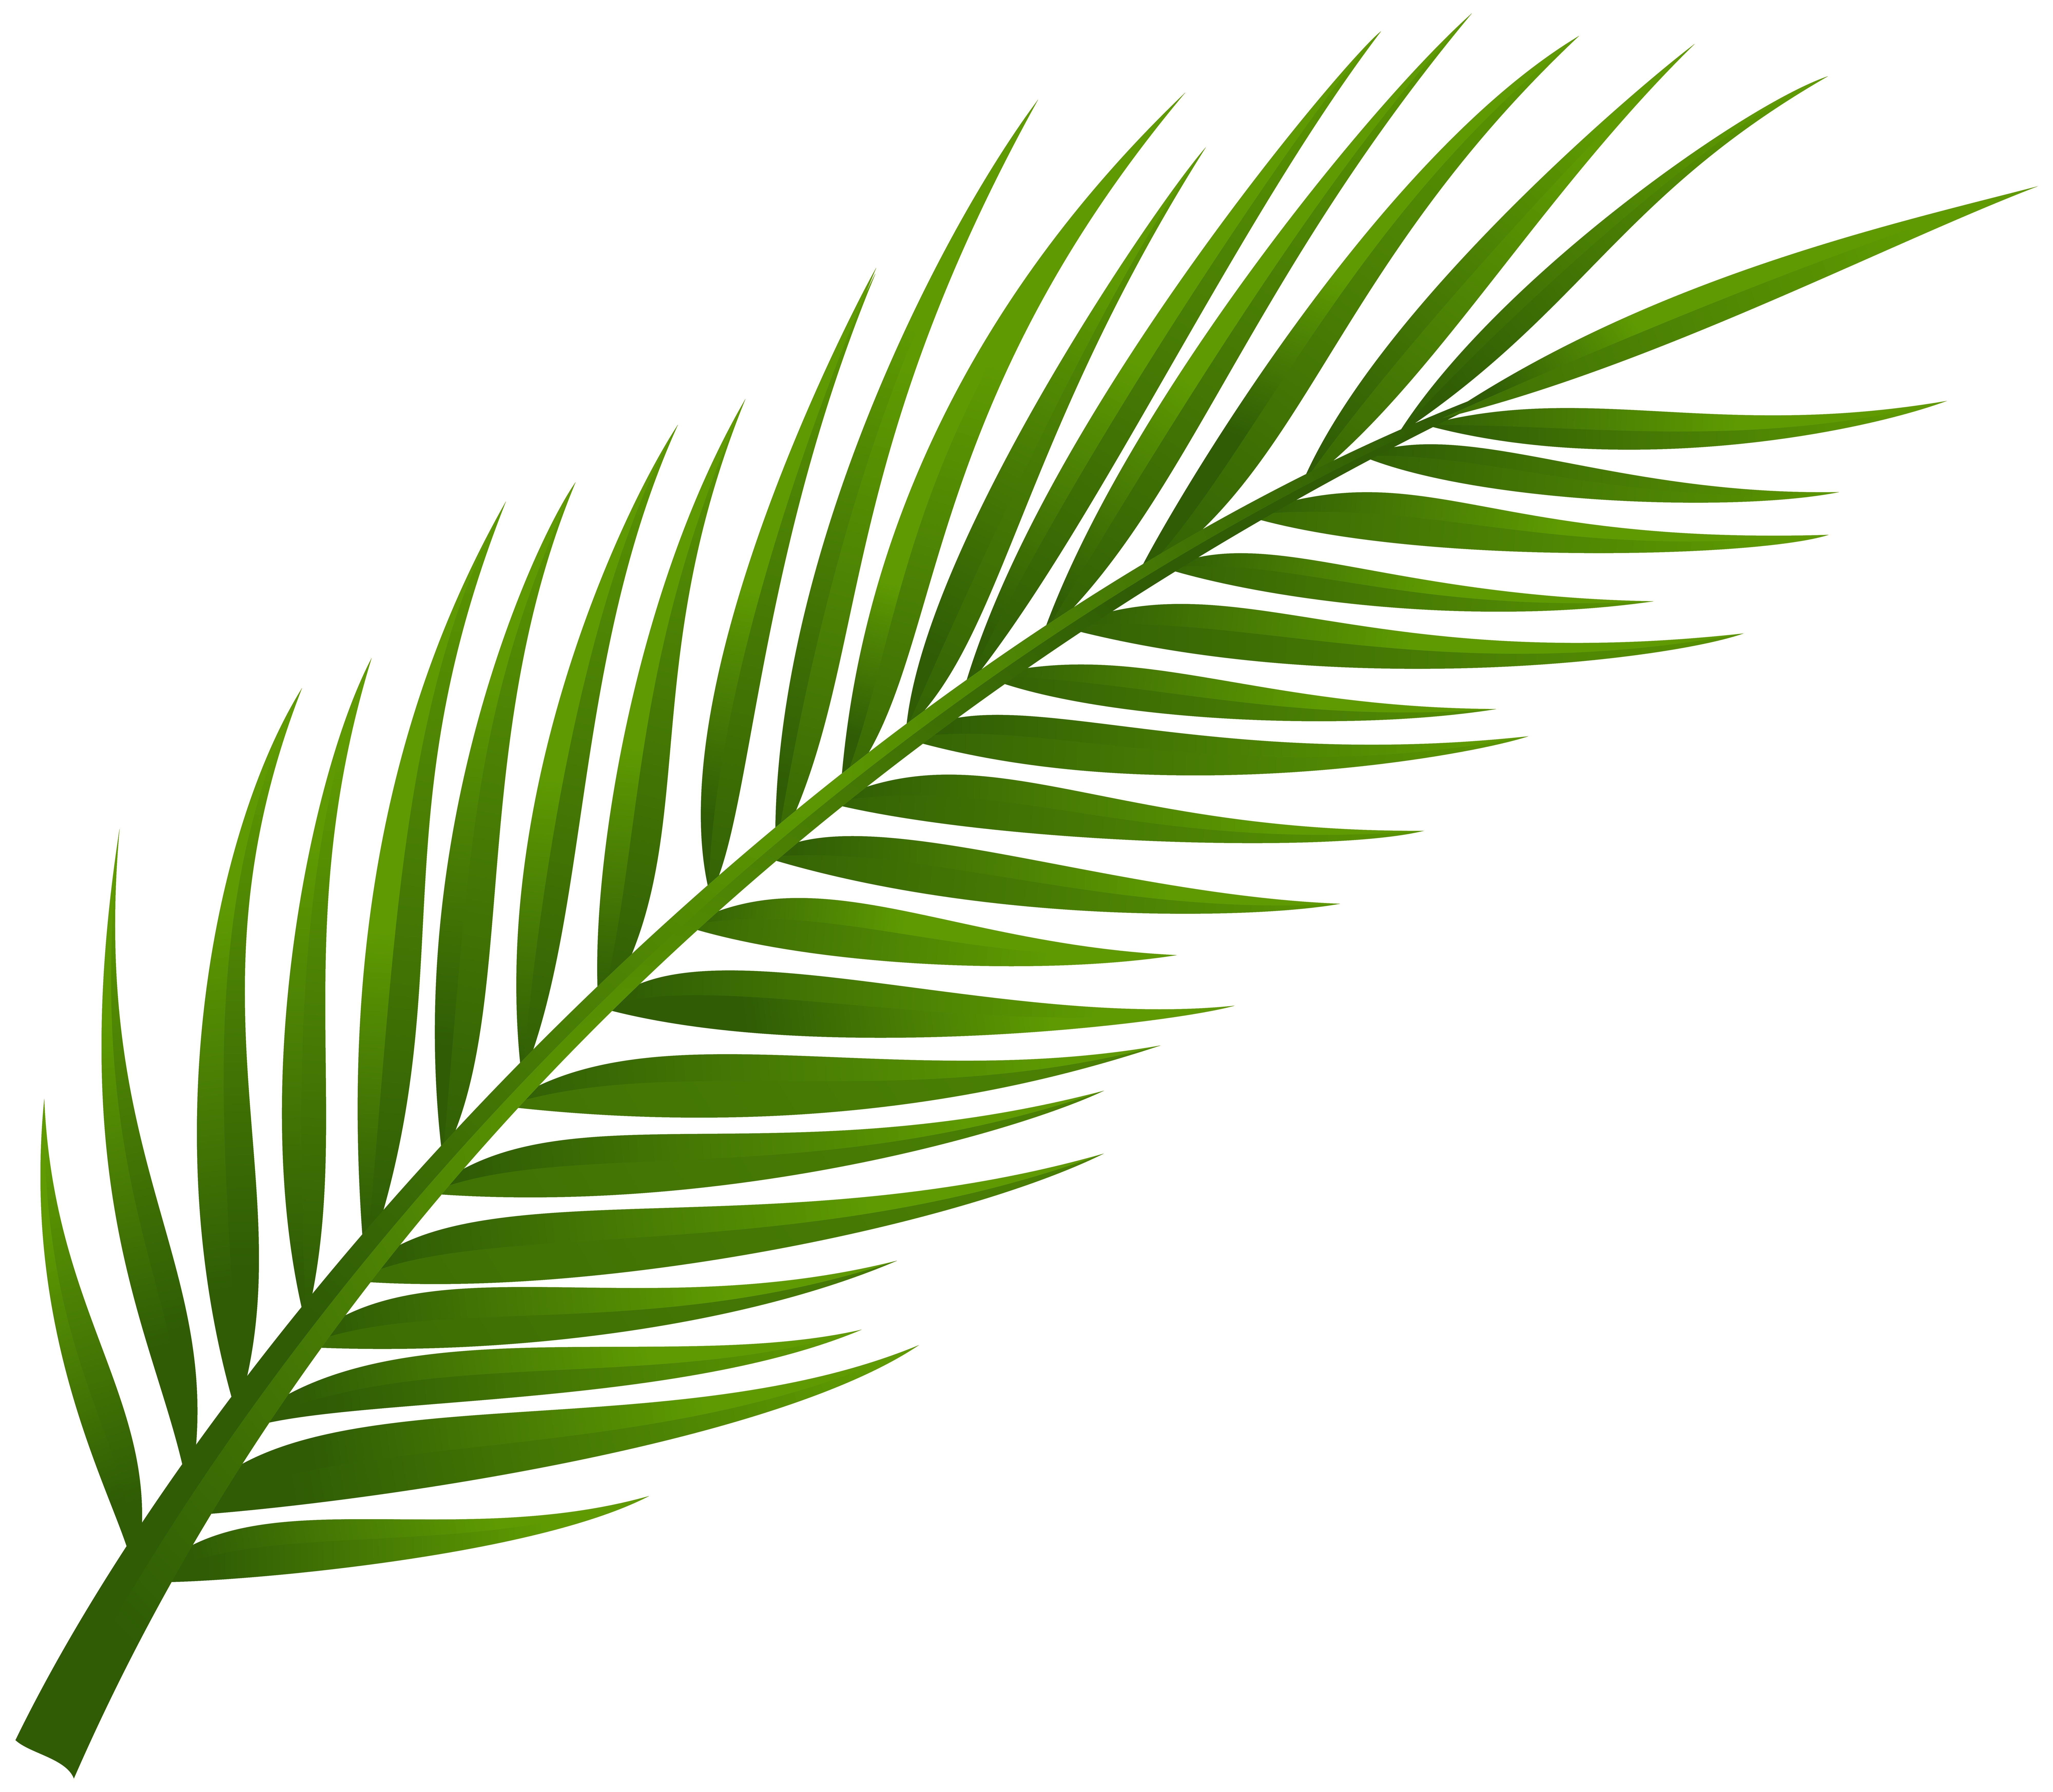 Tropical Leaves Clipart